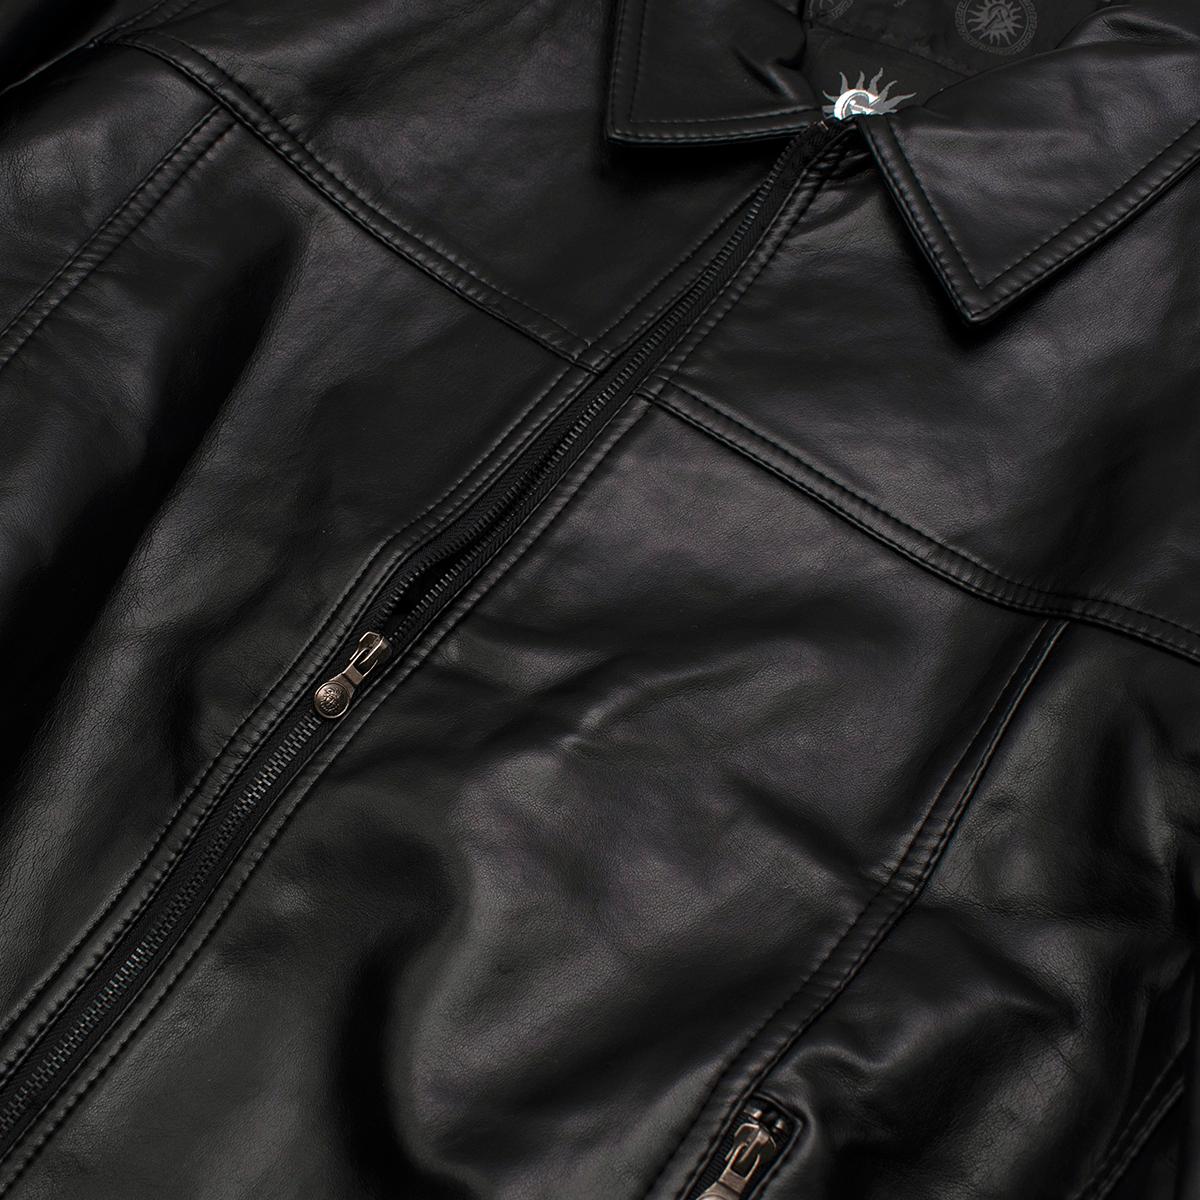 Gianni Versace Vintage Leather Biker Jacket - Us size 44 In Excellent Condition For Sale In London, GB